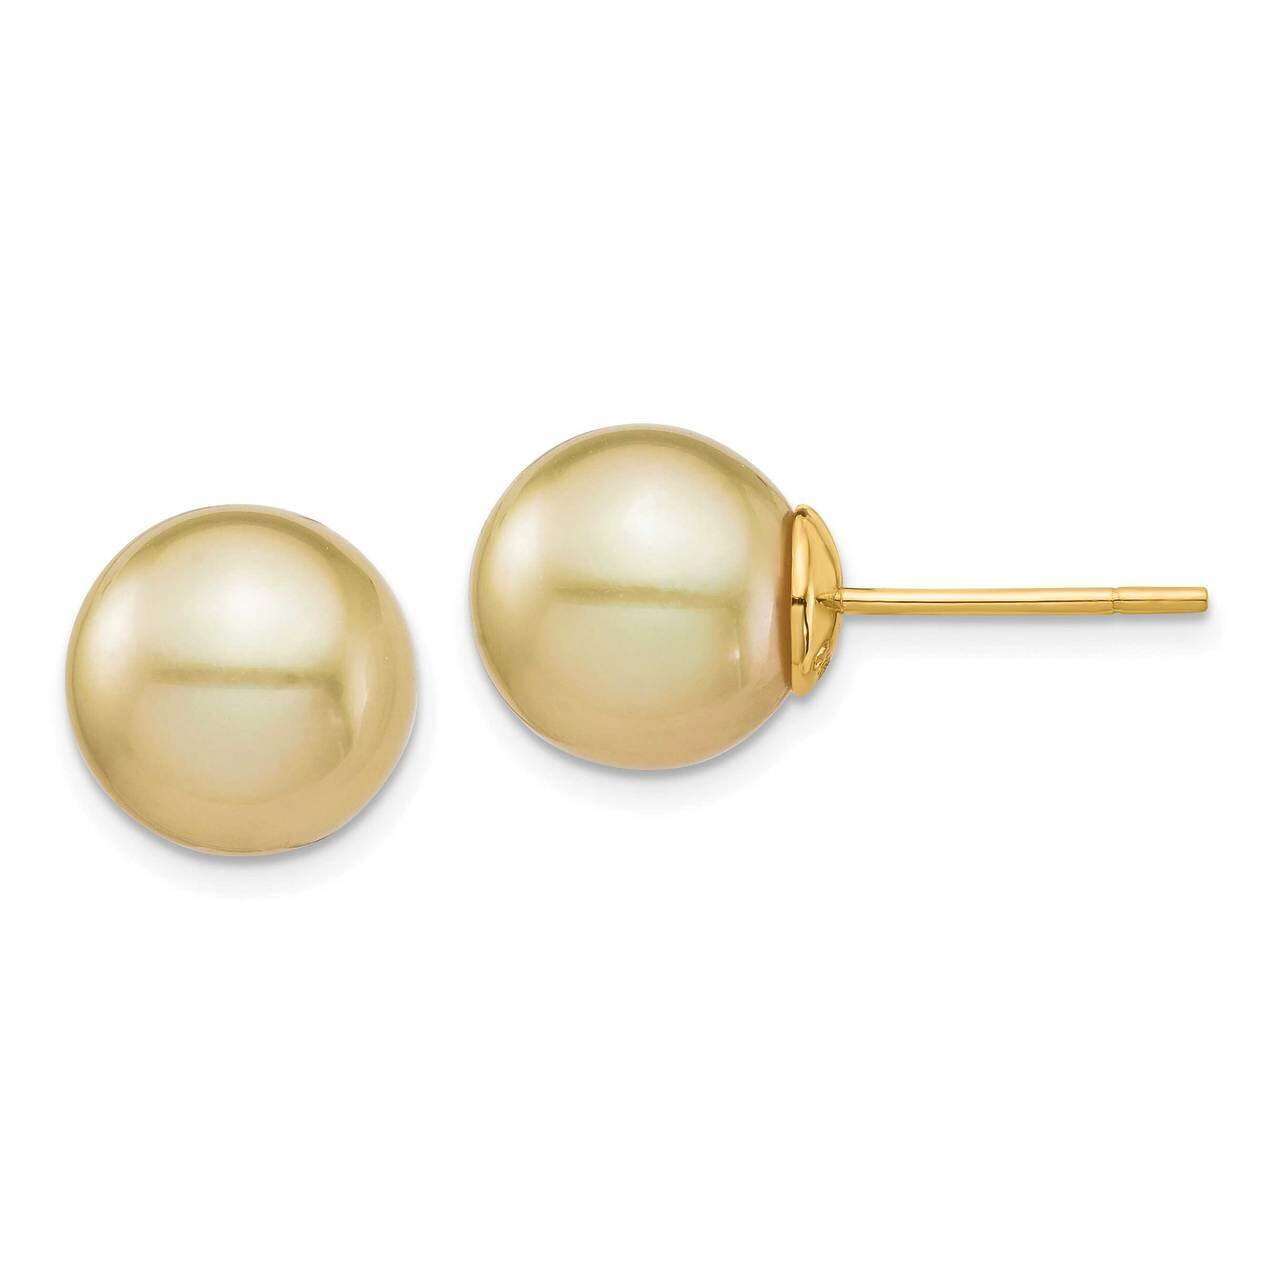 10-11mm Golden Round Saltwater Cultured South Sea Pearl Post Earrings 14k Gold XF743E